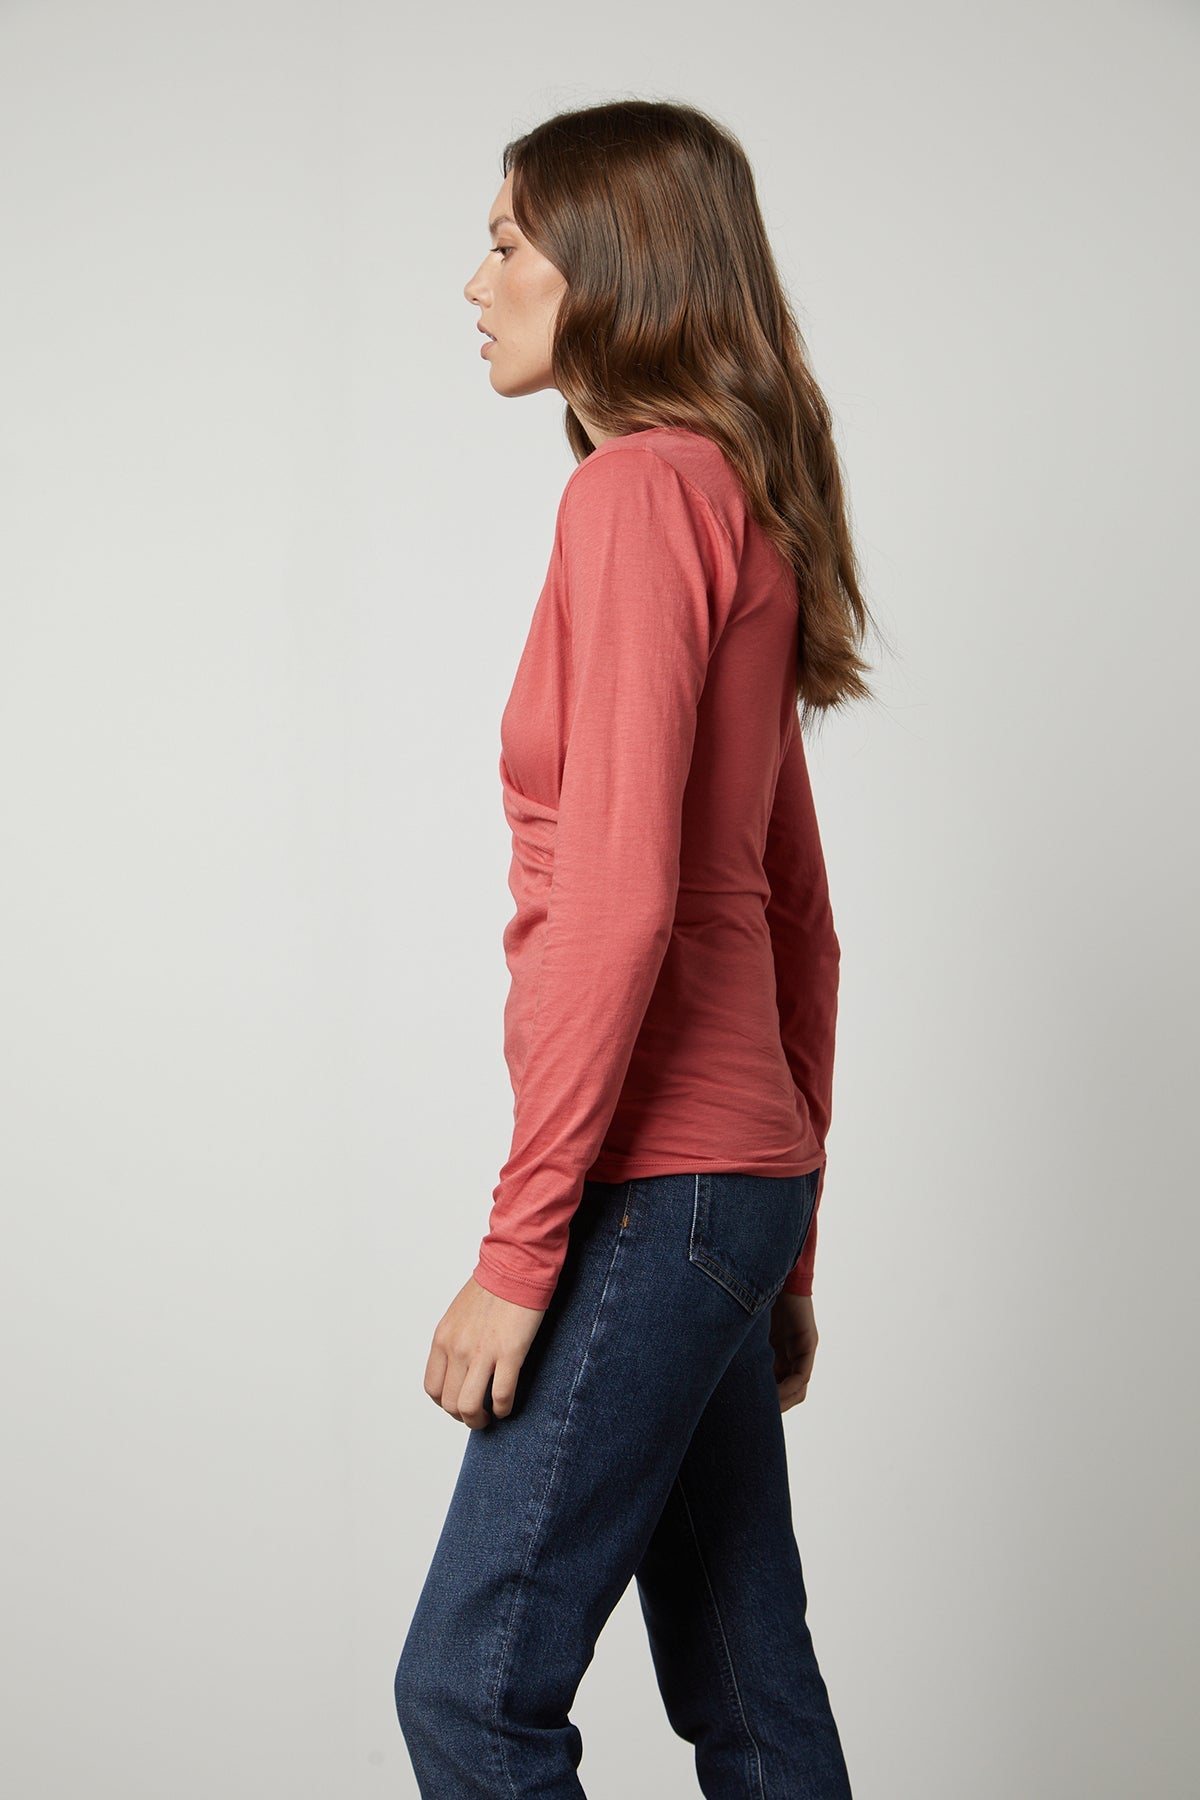   A woman wearing jeans and a long-sleeved MERI WRAP FRONT FITTED TOP by Velvet by Graham & Spencer. 